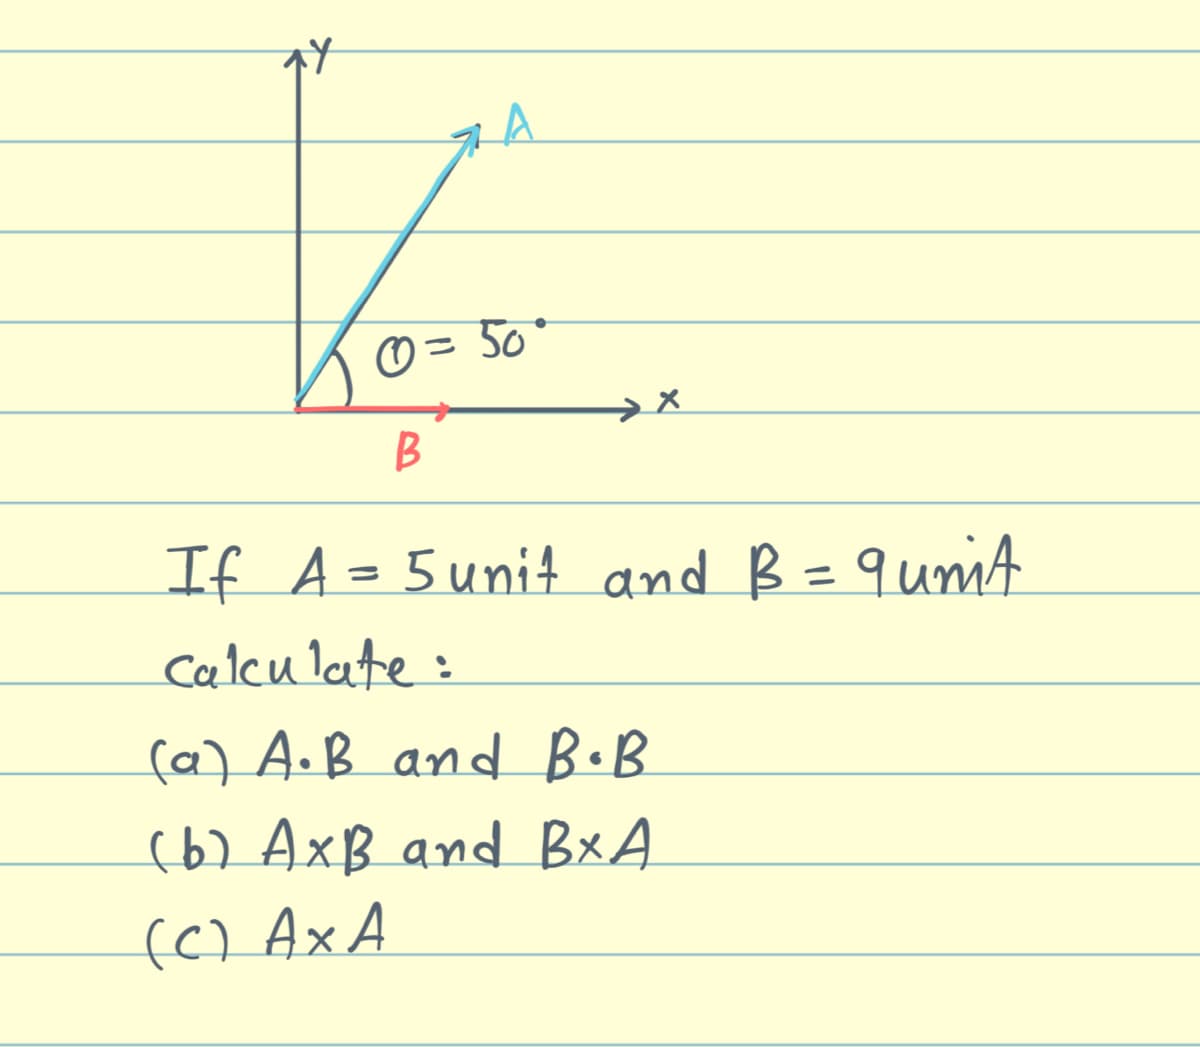 = 50°
If A =5 unit and B =quniA
Calcu late:
%3D
(a) A.B and B.B
(6) AxB and BxA
(C) Ax A
